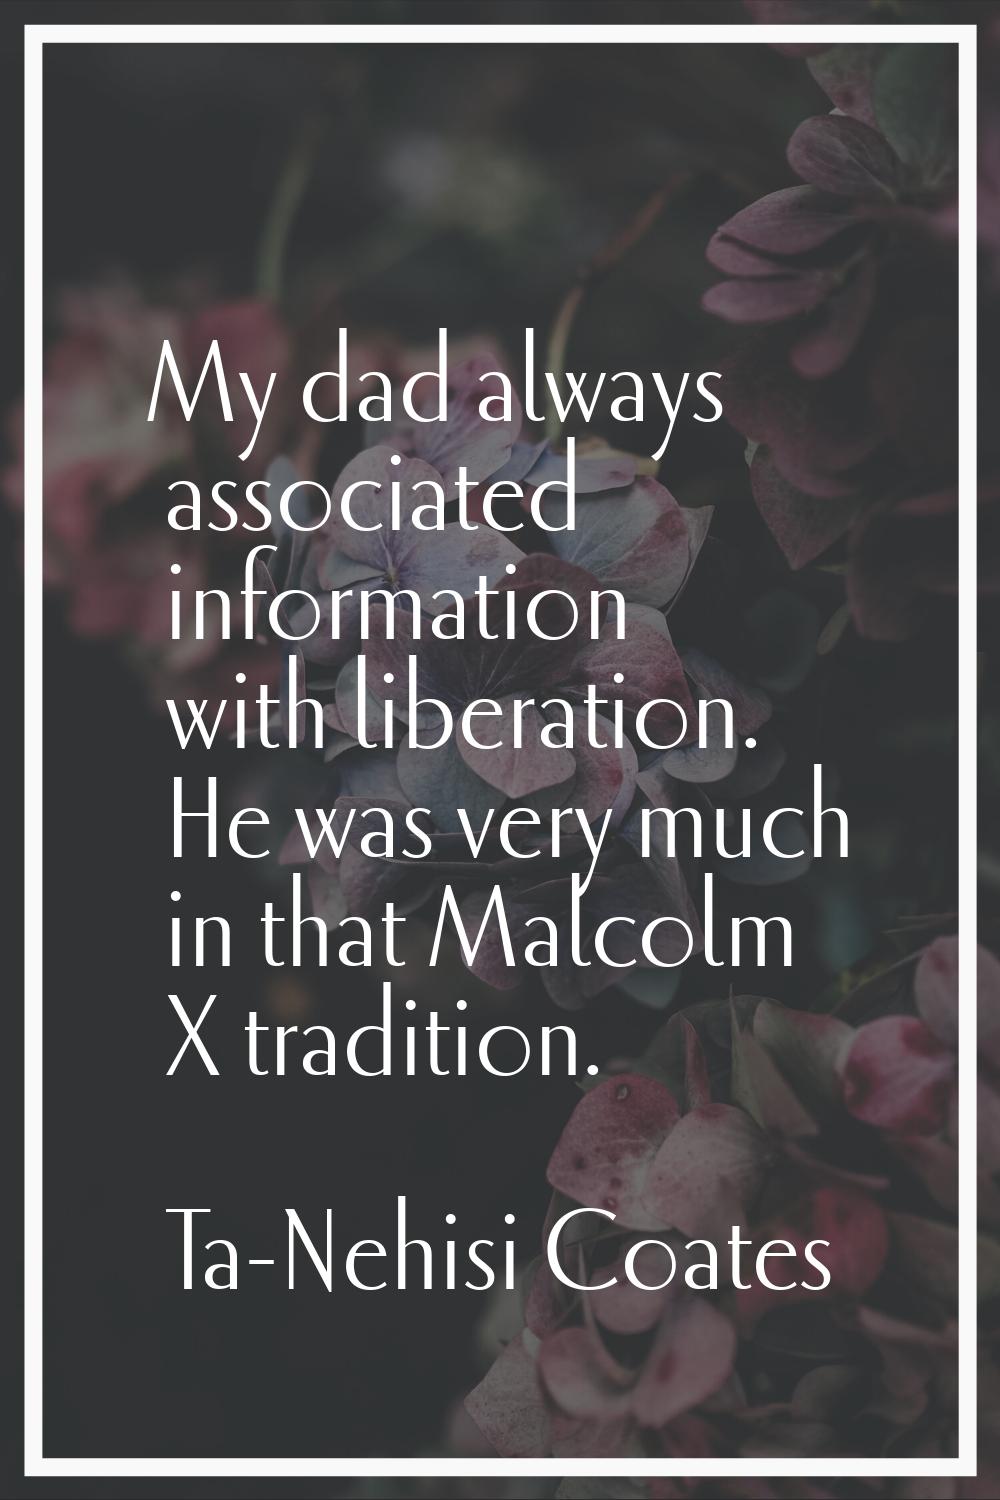 My dad always associated information with liberation. He was very much in that Malcolm X tradition.